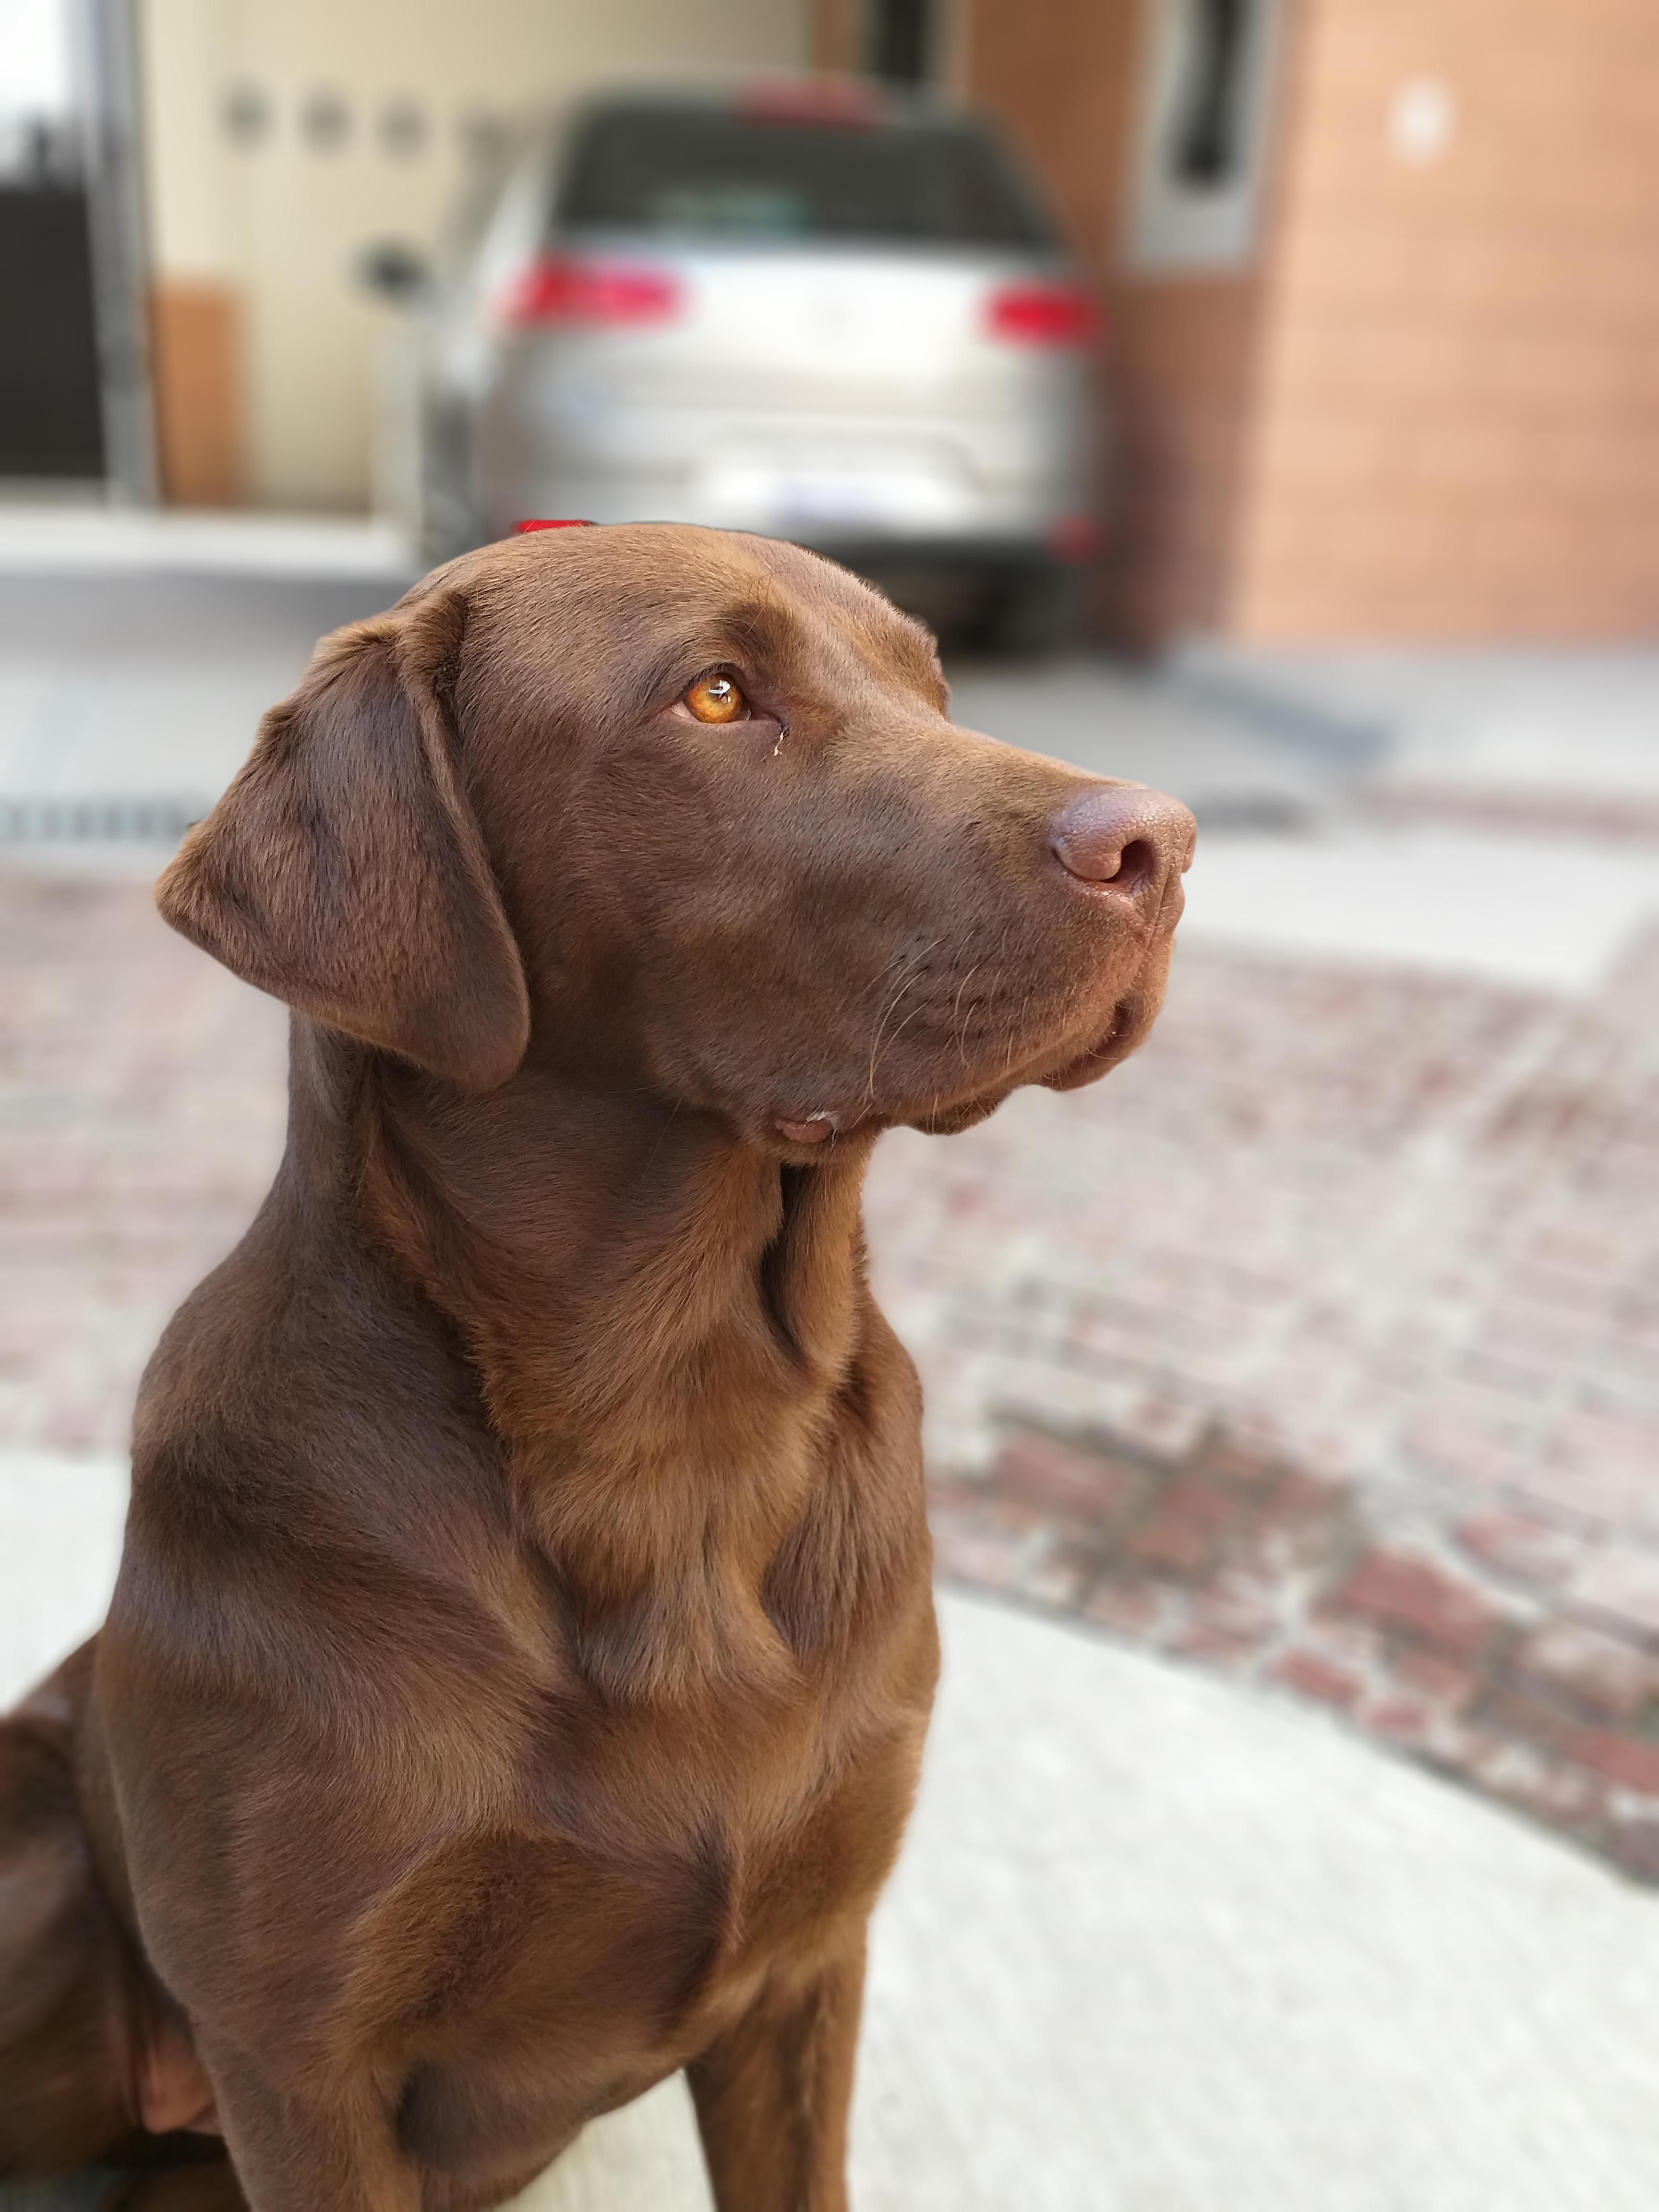 Took this photo of my 8 month old chocolate lab. #Music